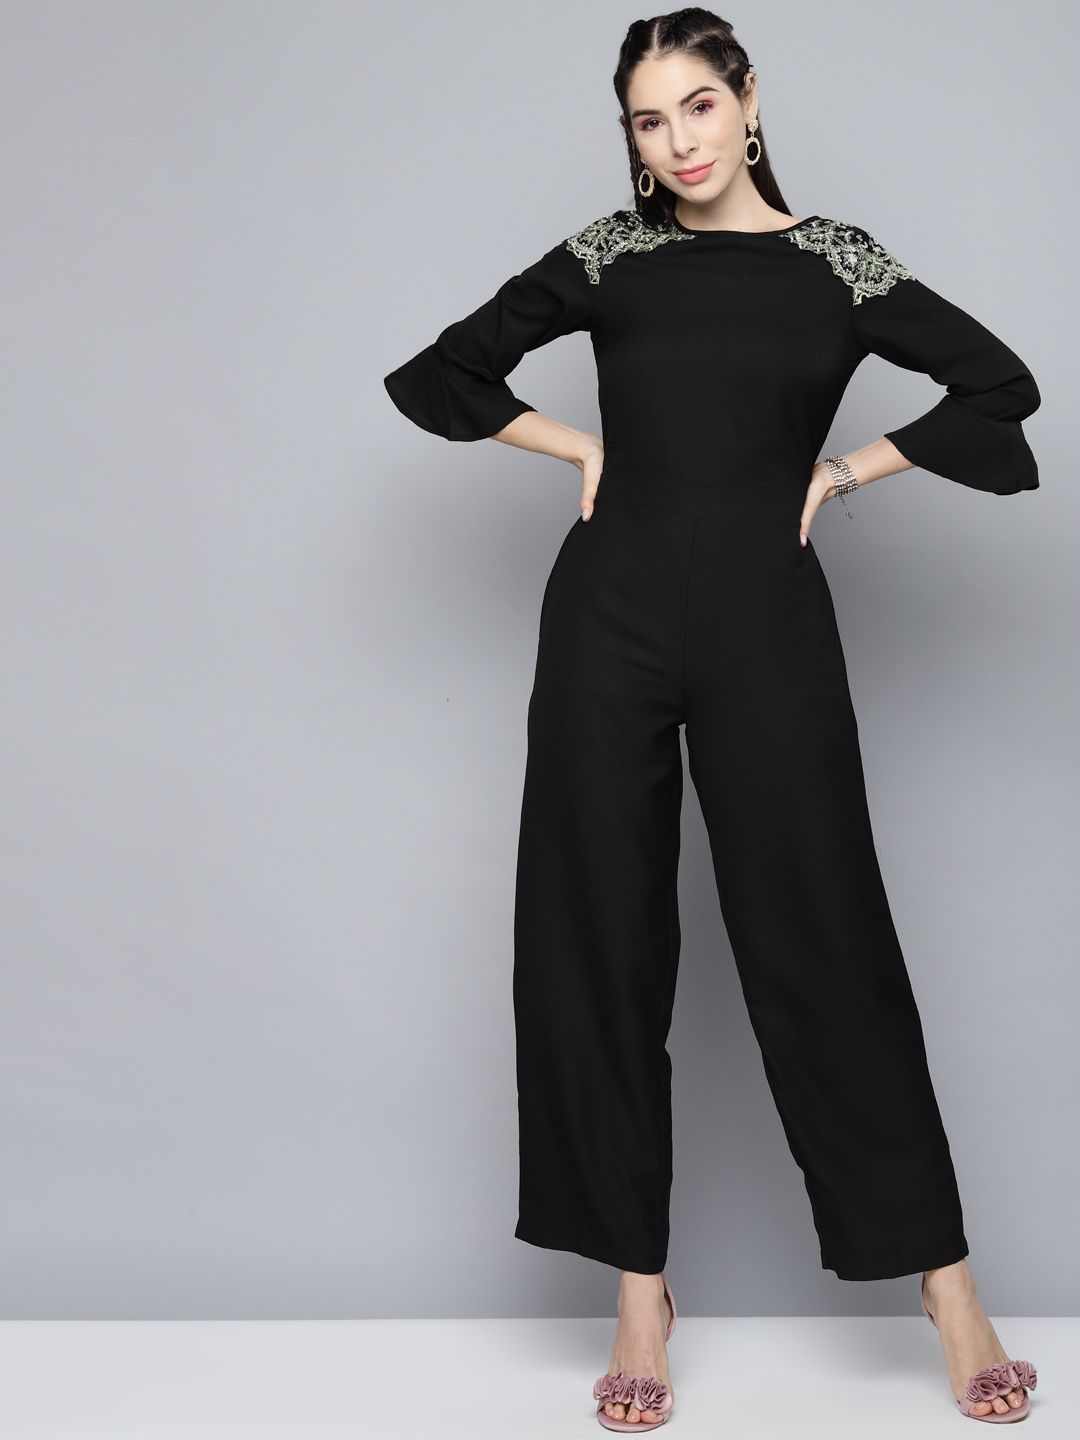 SASSAFRAS Black Basic Solid Jumpsuit with Lace Inserts Price in India